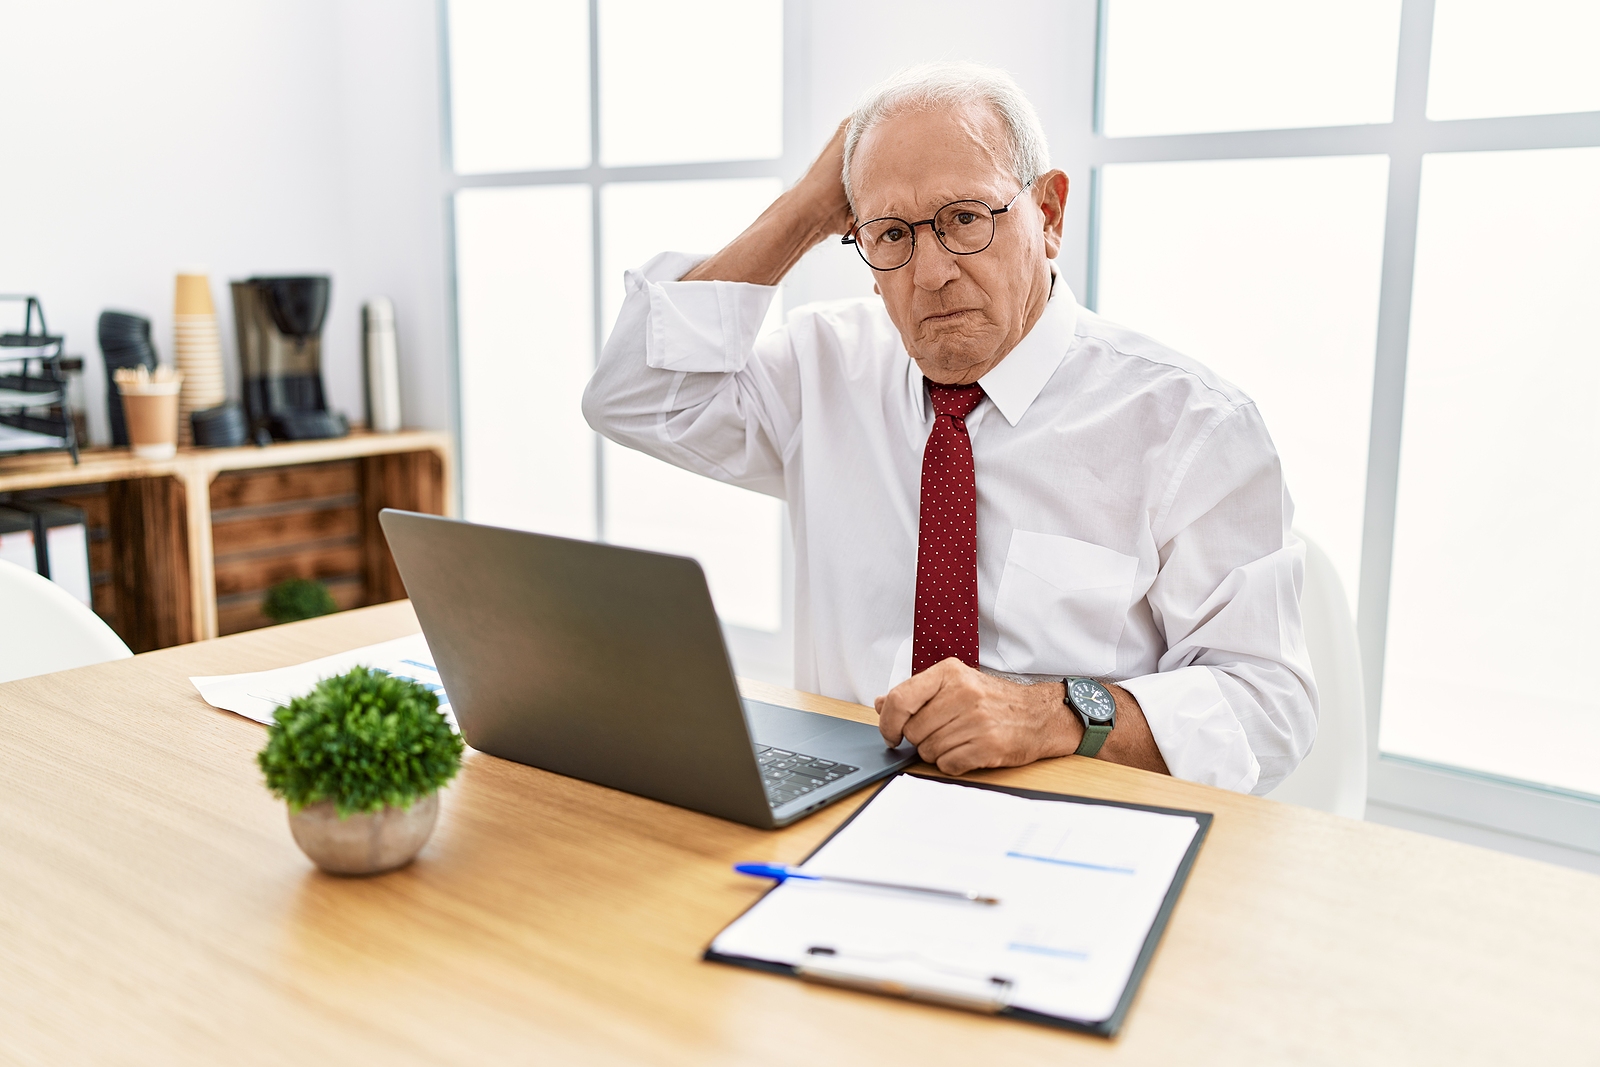 Man using computer laptop confused about estate planning terms